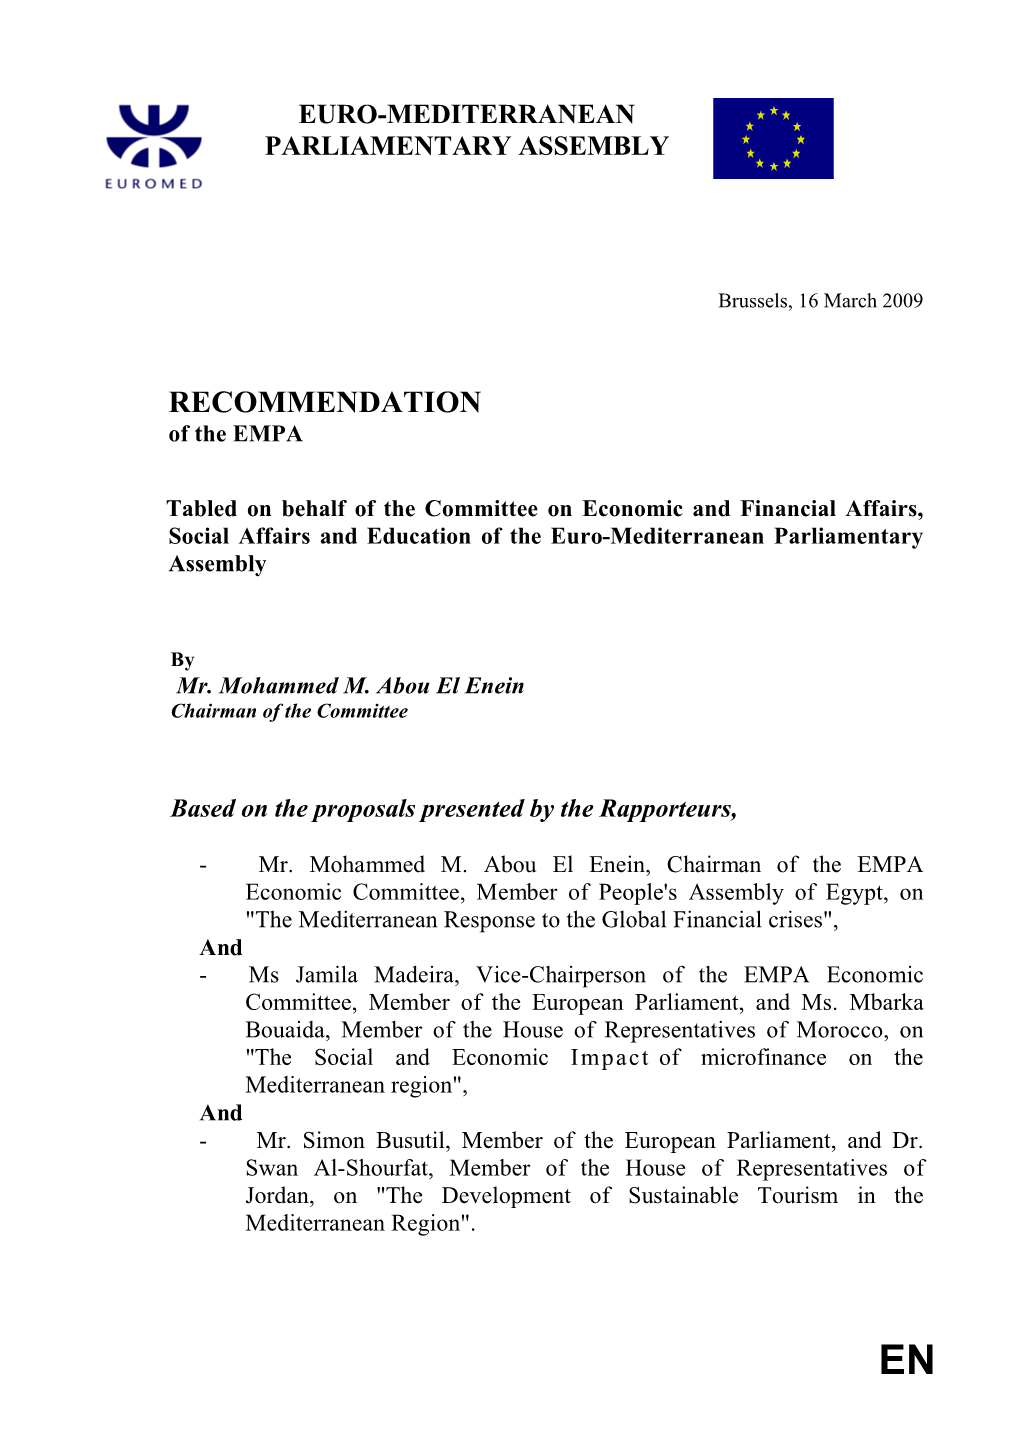 RECOMMENDATION of the EMPA